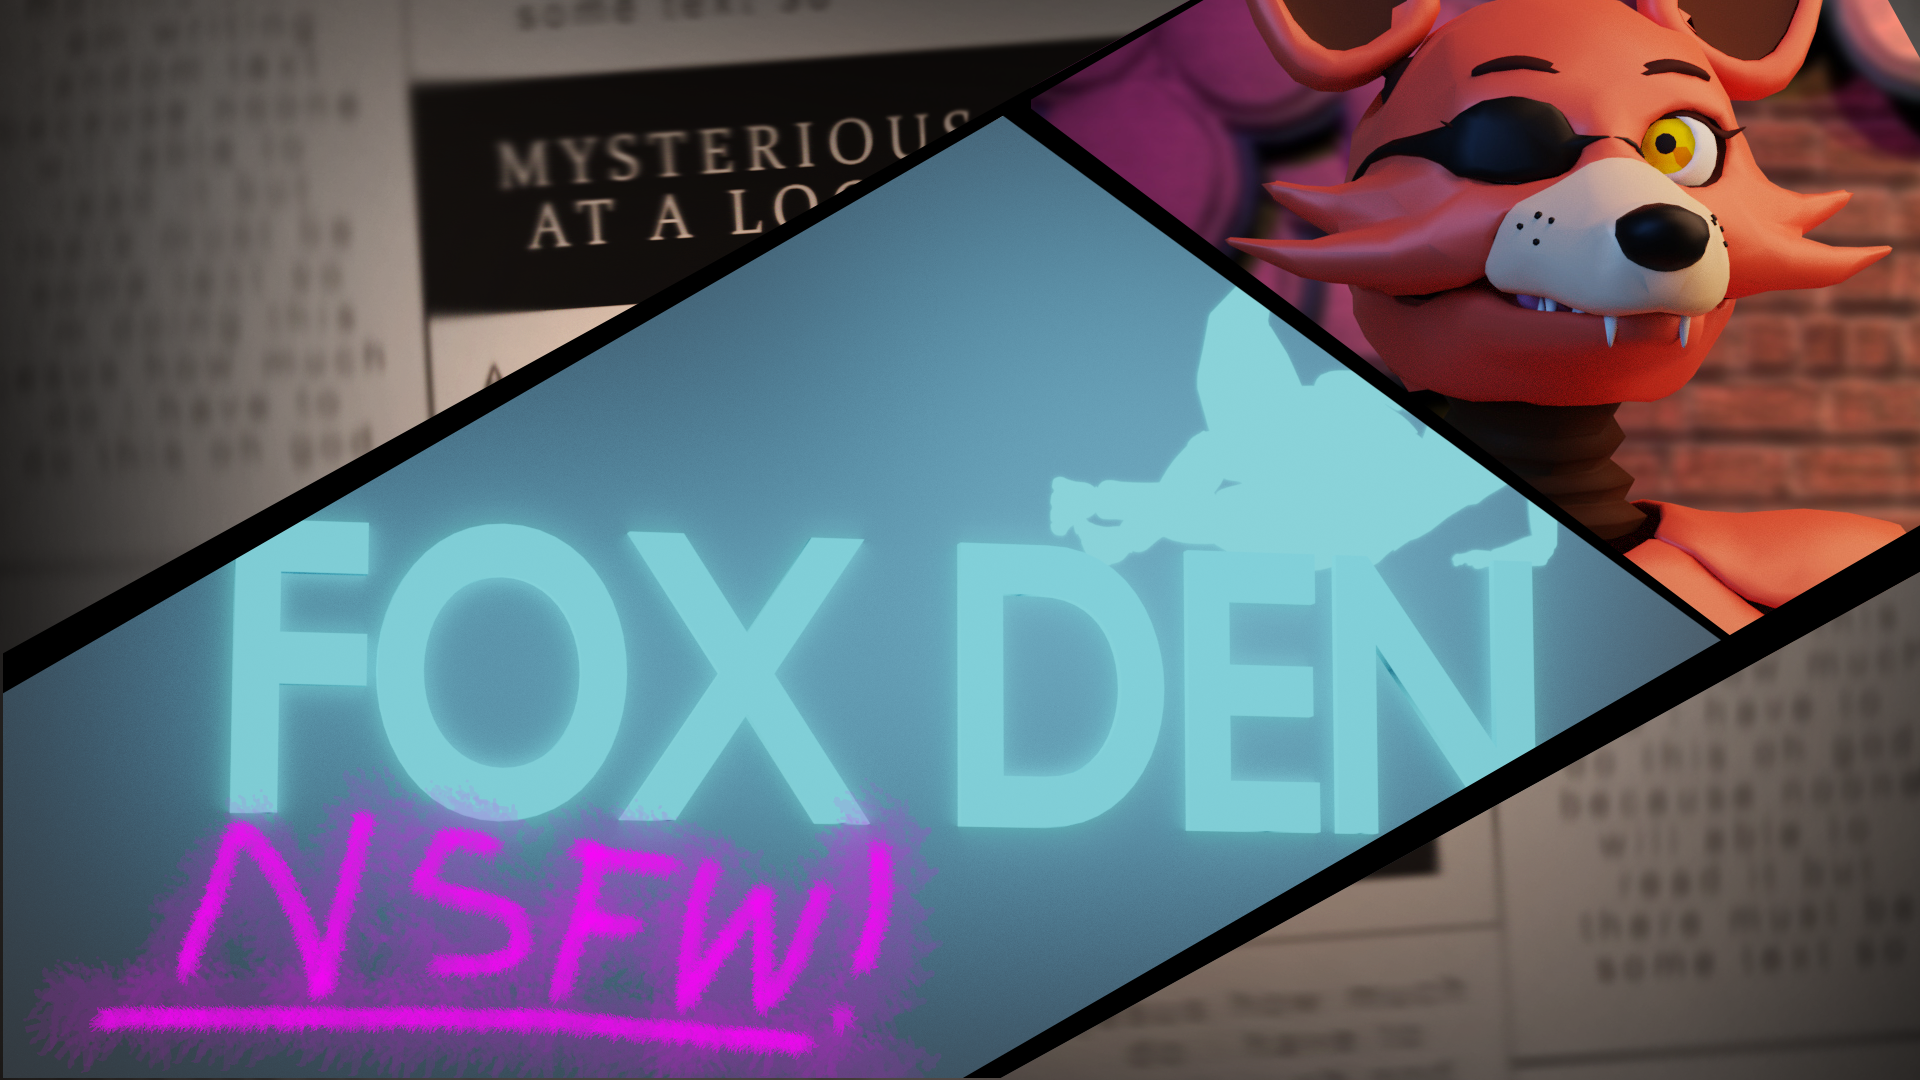 Fox Den 09 (there Is No 08 Cuz I Named Files Wrong)